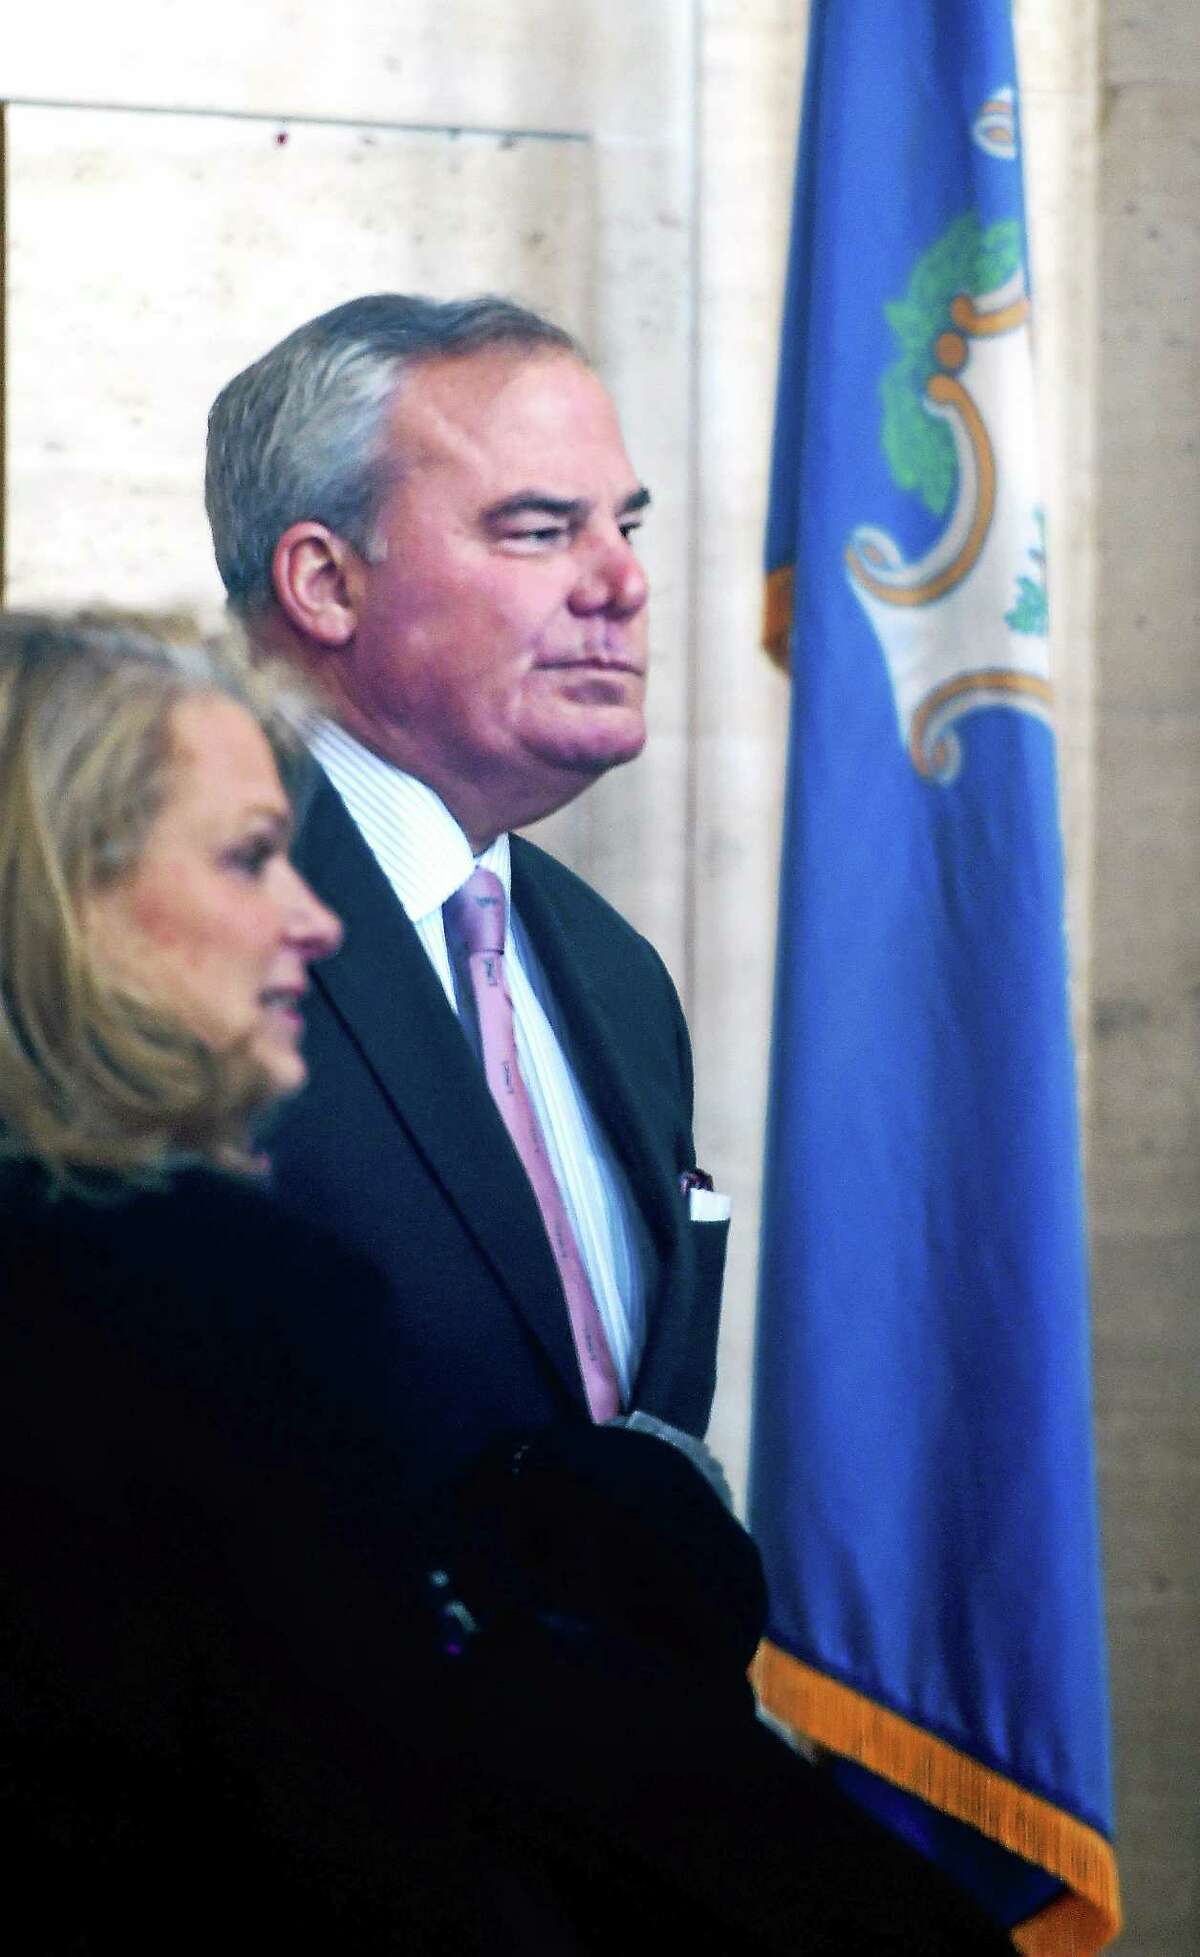 Former Connecticut Governor John Rowland, center, waits inside the lobby of Federal Court in New Haven before sentencing with his wife, Patty, left, Wednesday.